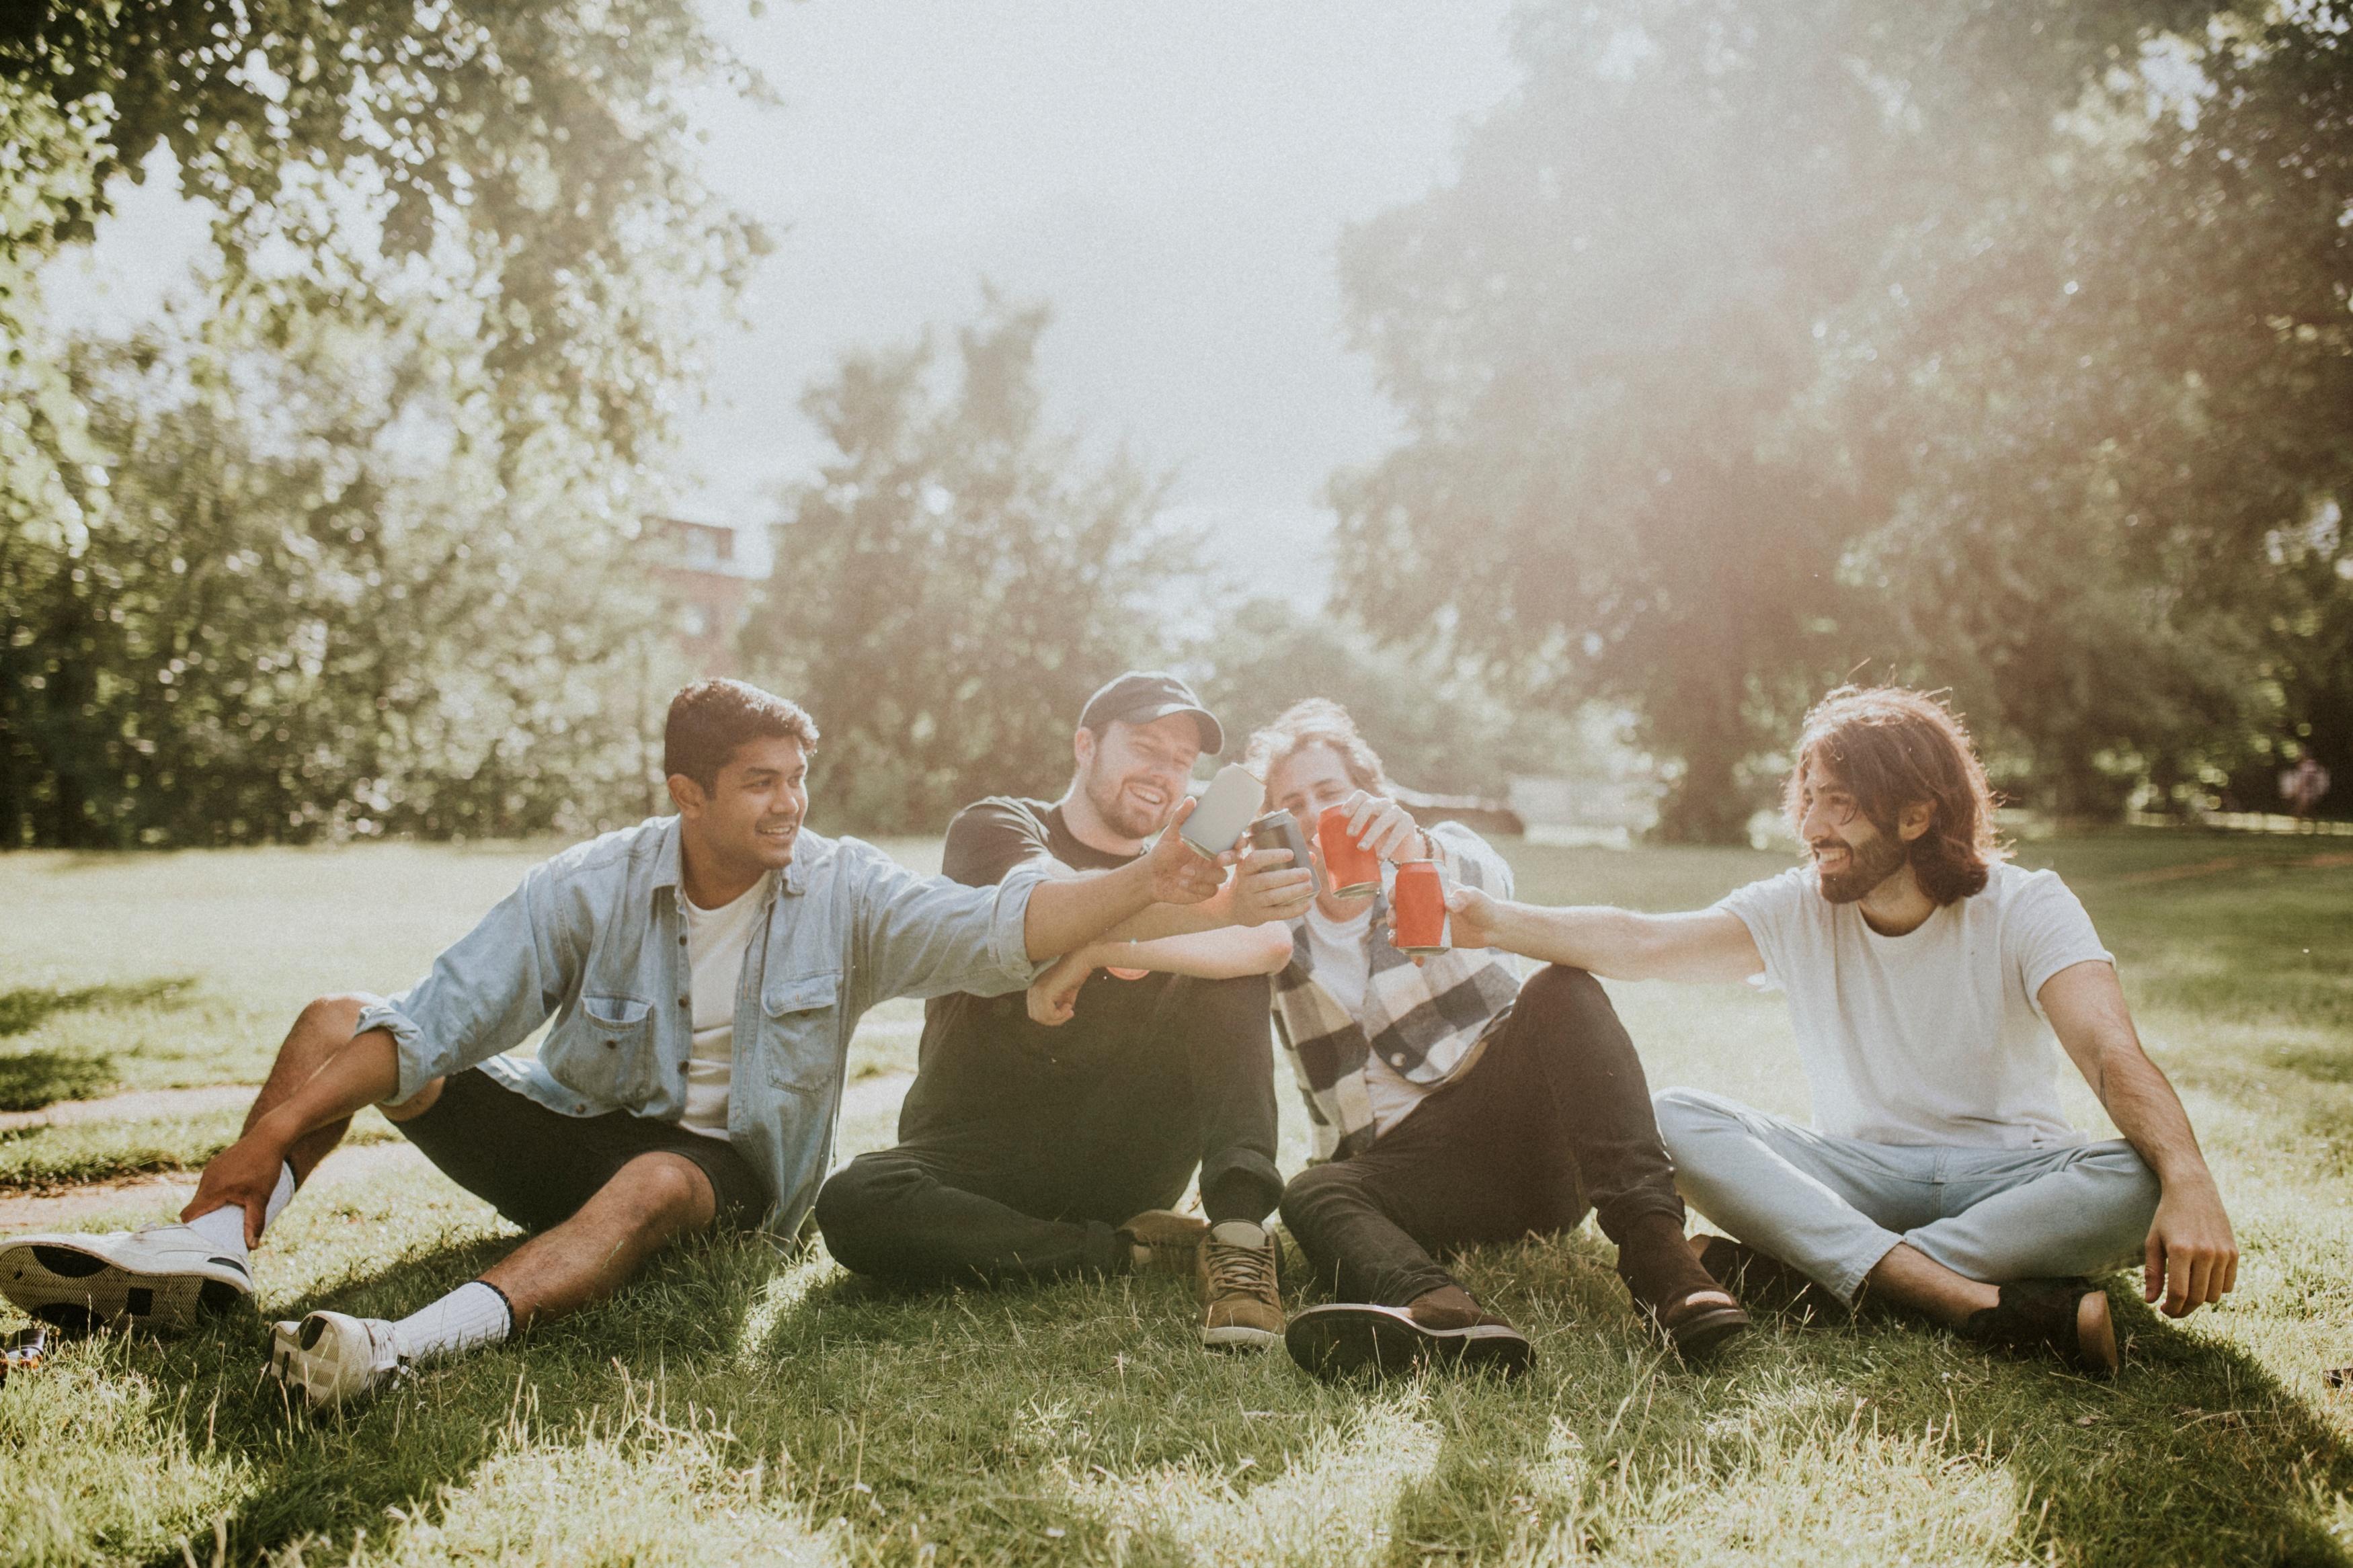 New All Time Low photoshoot for AP Mag | Group photo poses, Band  photoshoot, All time low